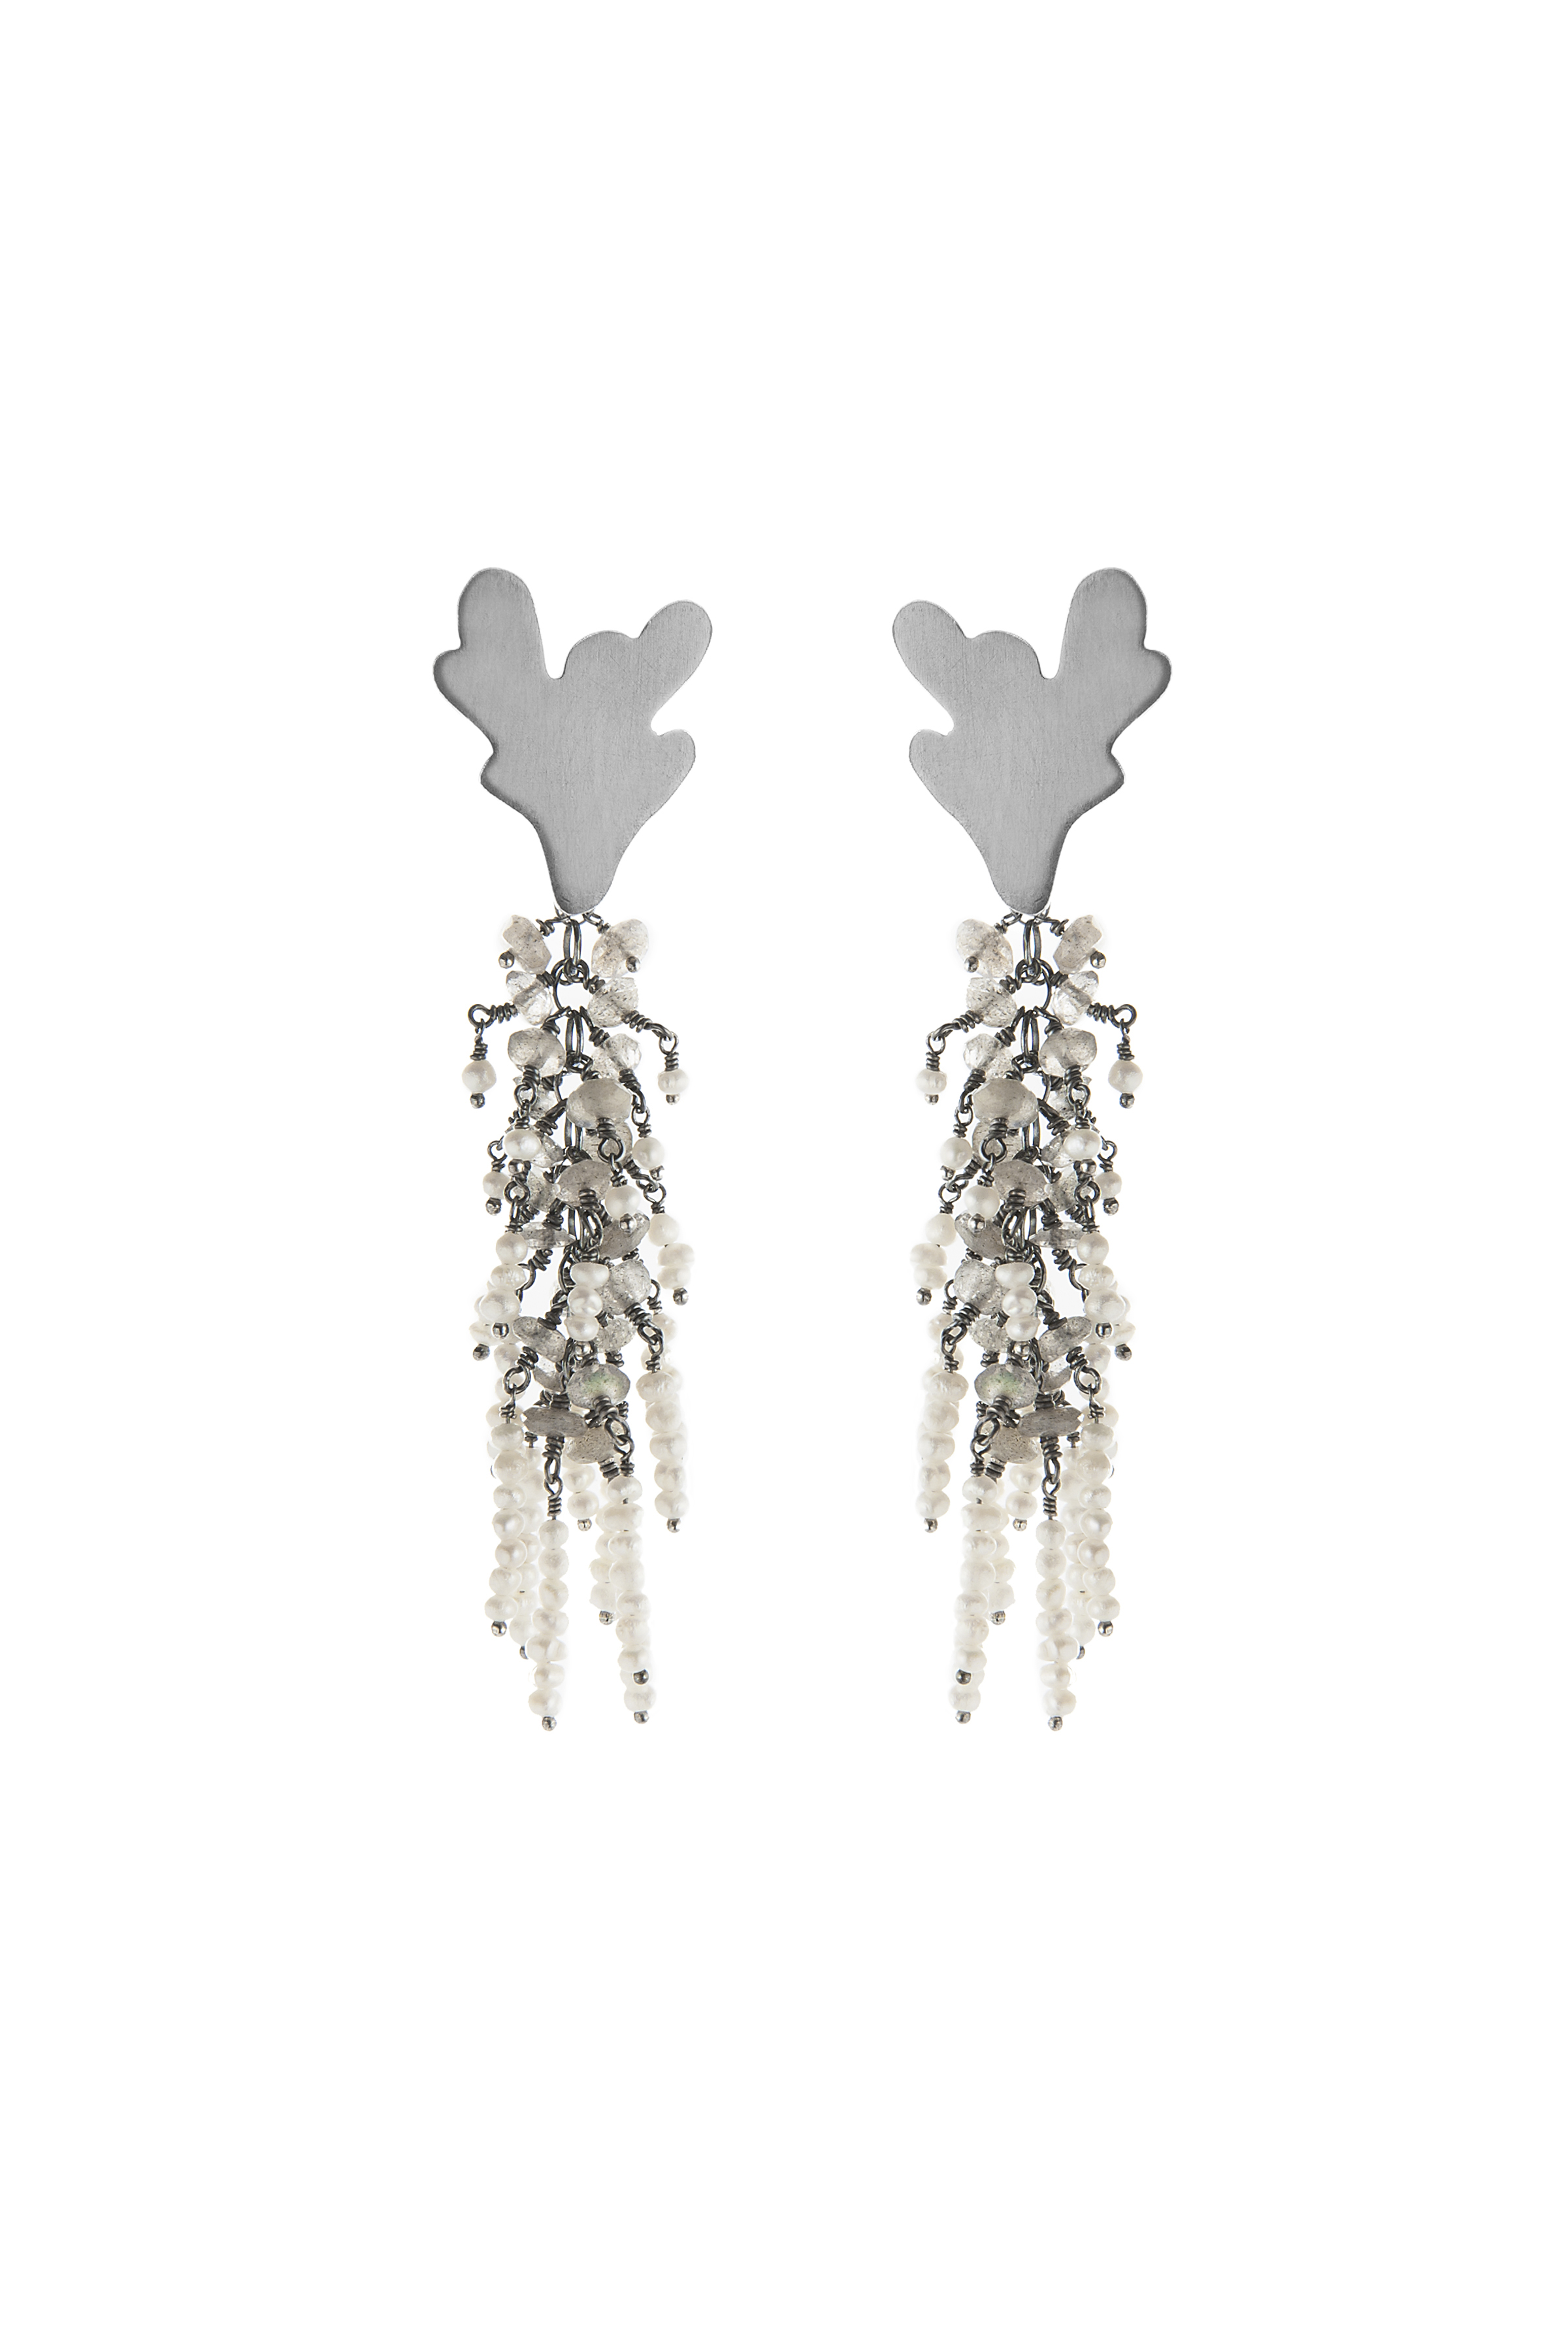 Michelle Pajak-Reynolds Undina Collection Galena dangle earrings